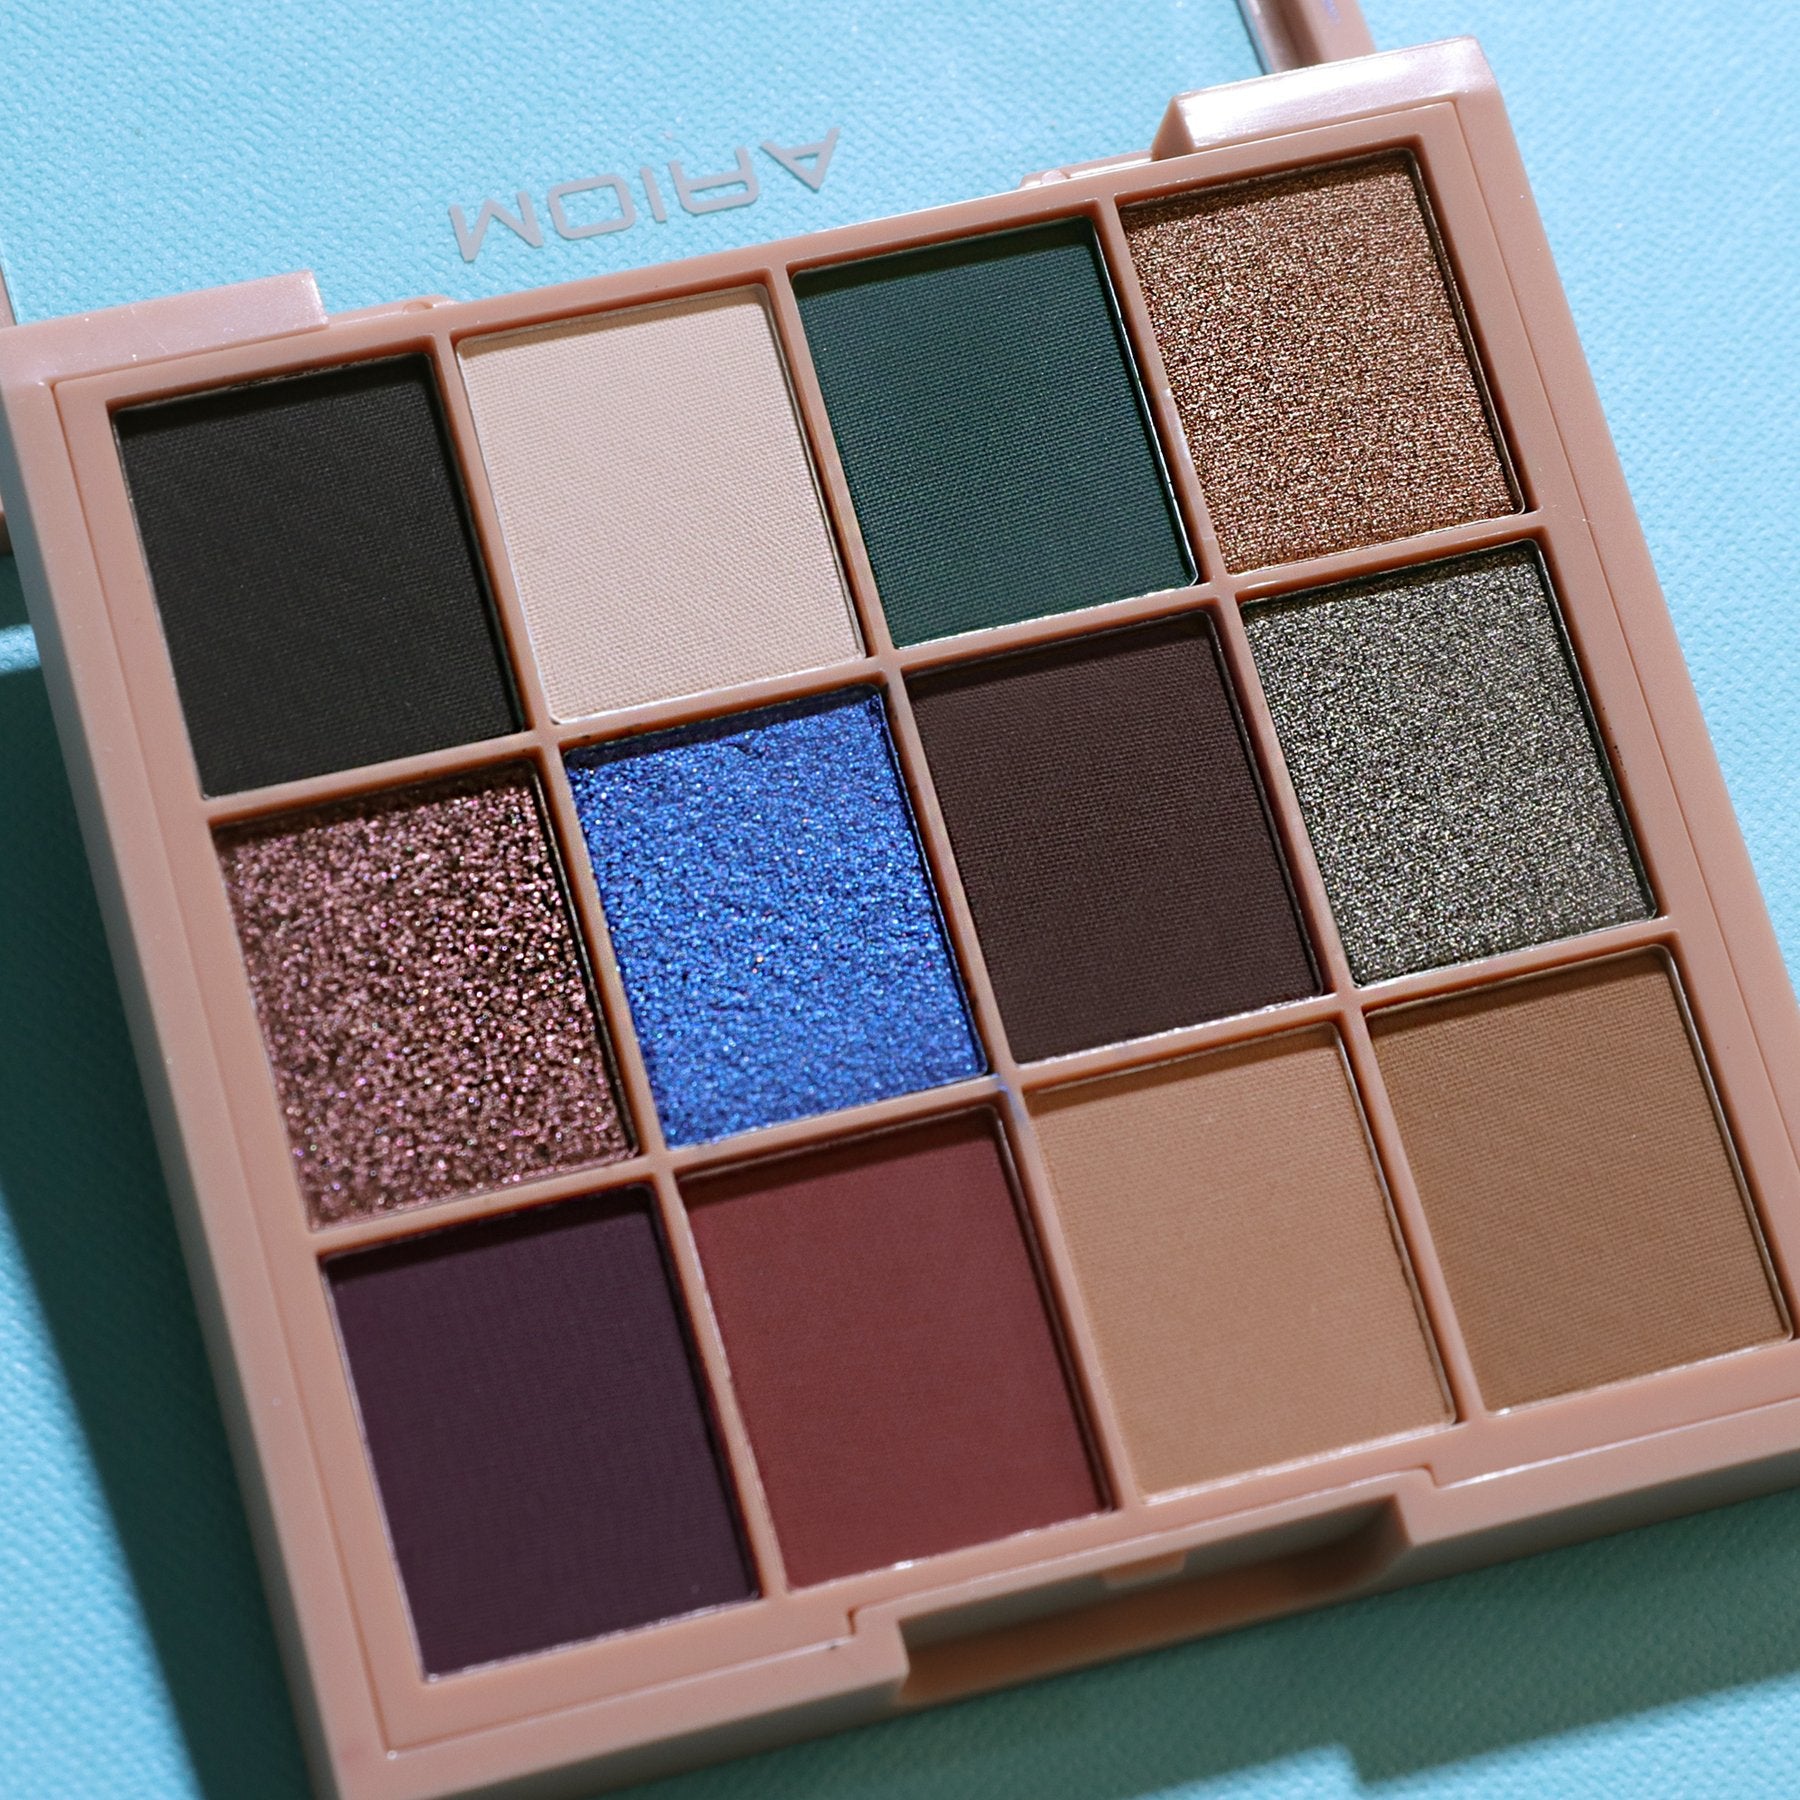 Moira Beauty - Seriously Chic Palette